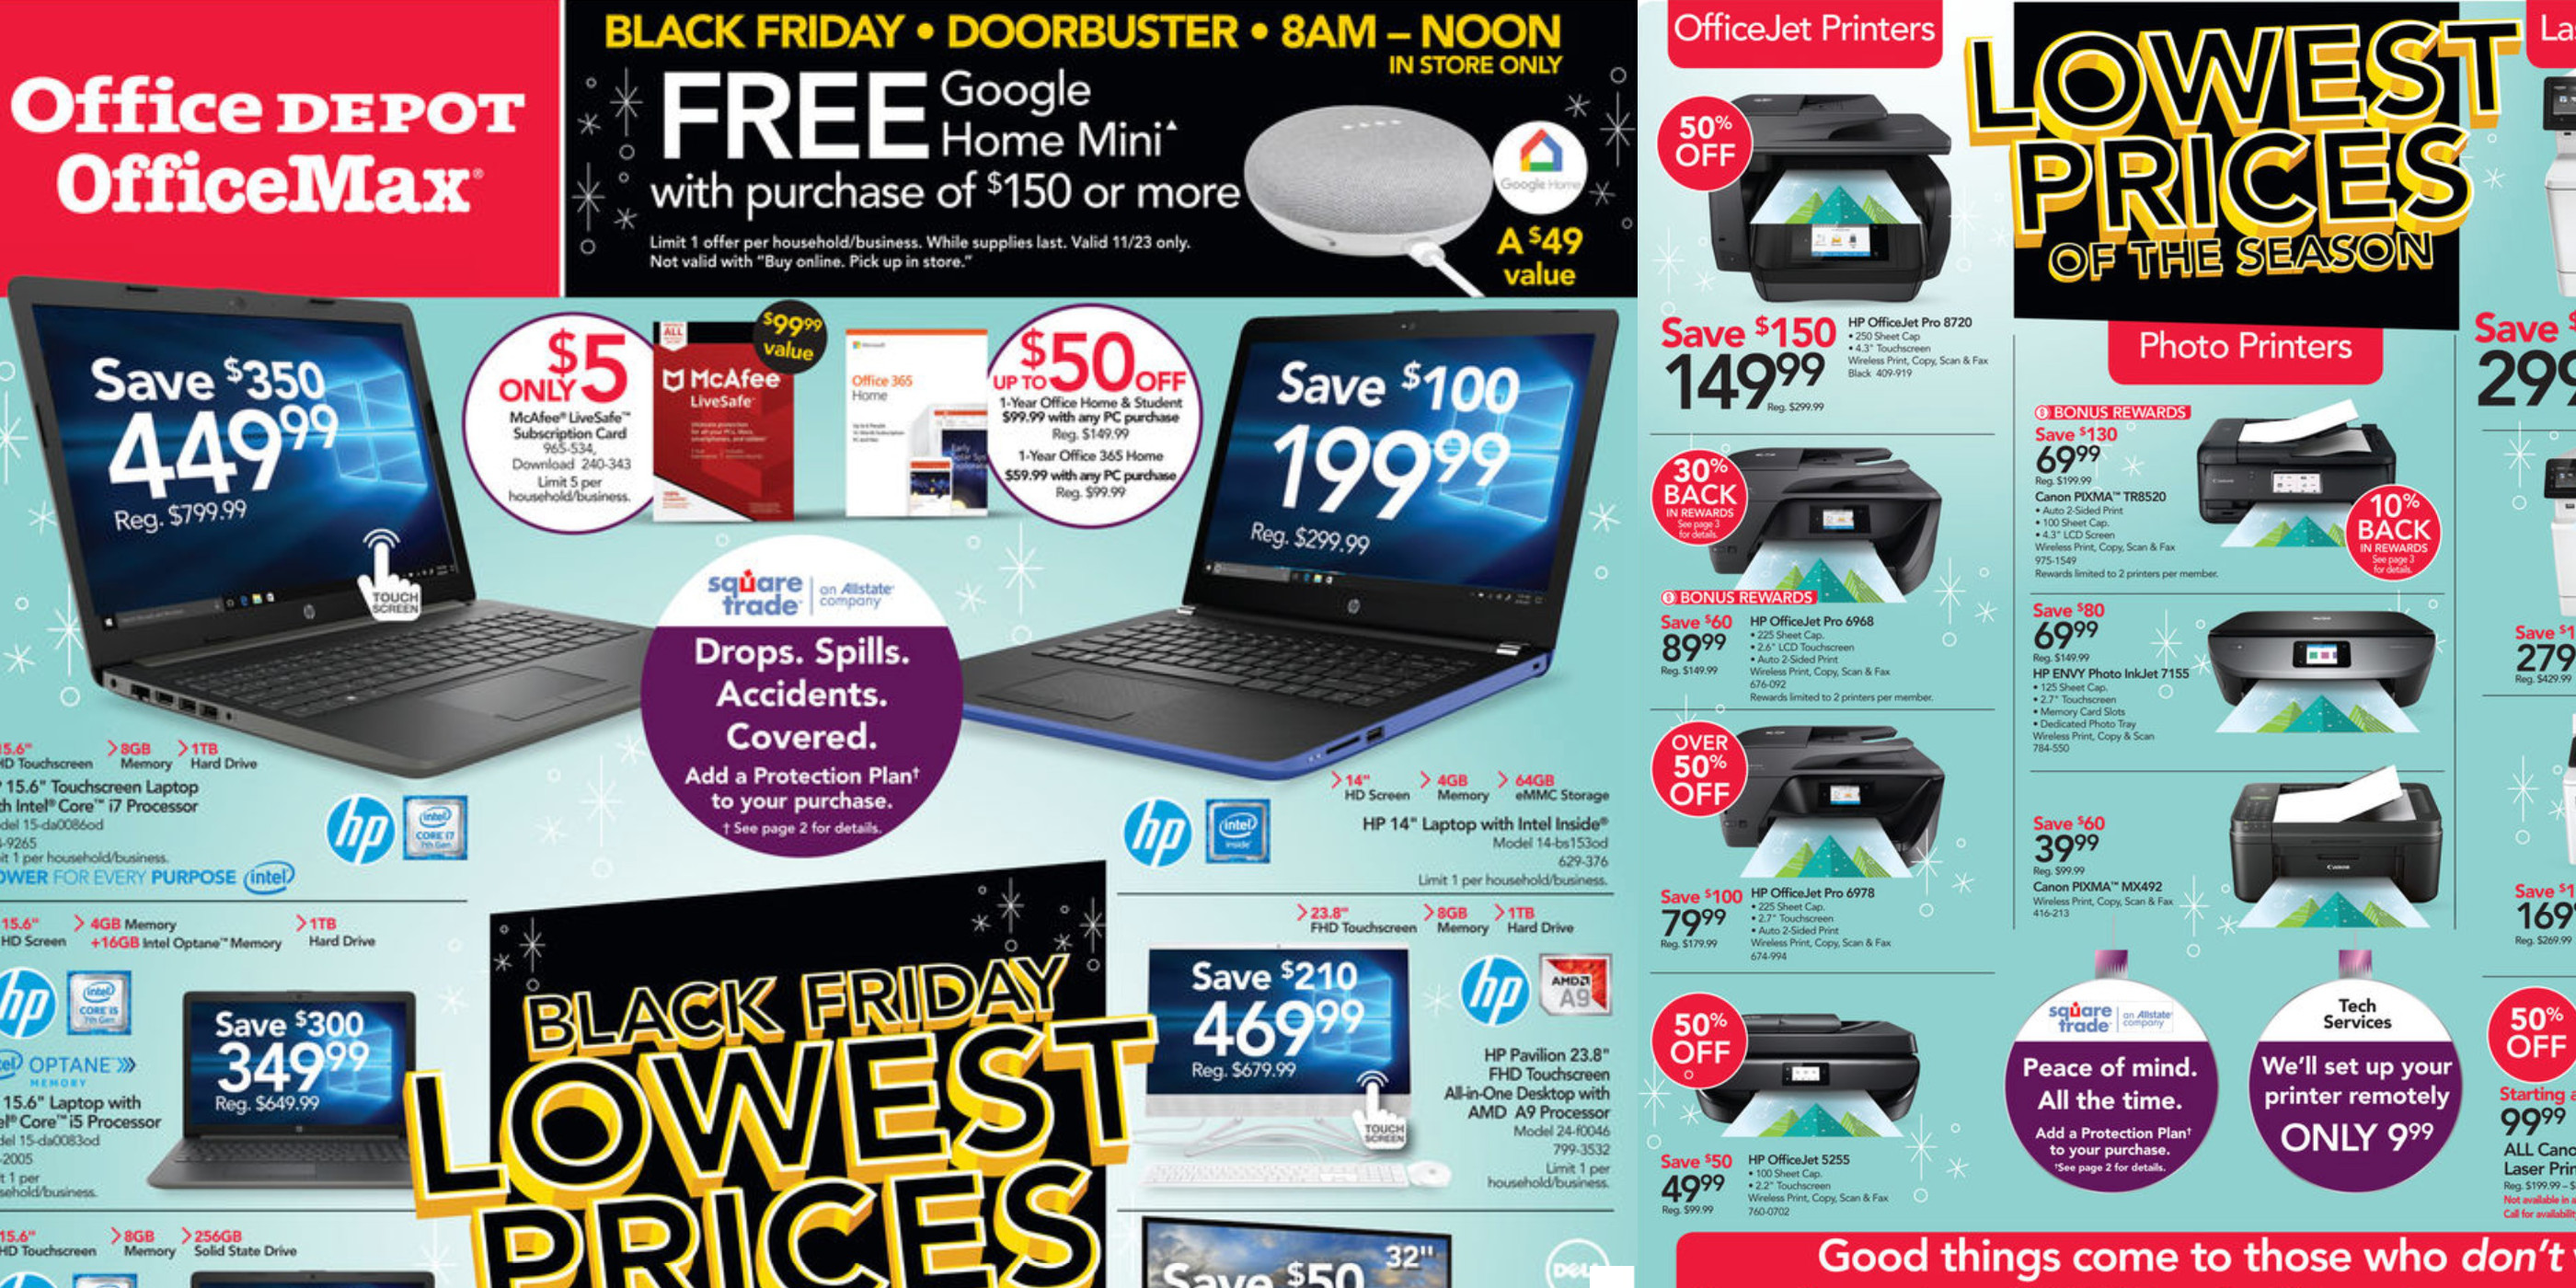 Office Depot Black Friday ad deivers deals on tech and more - 9to5Toys